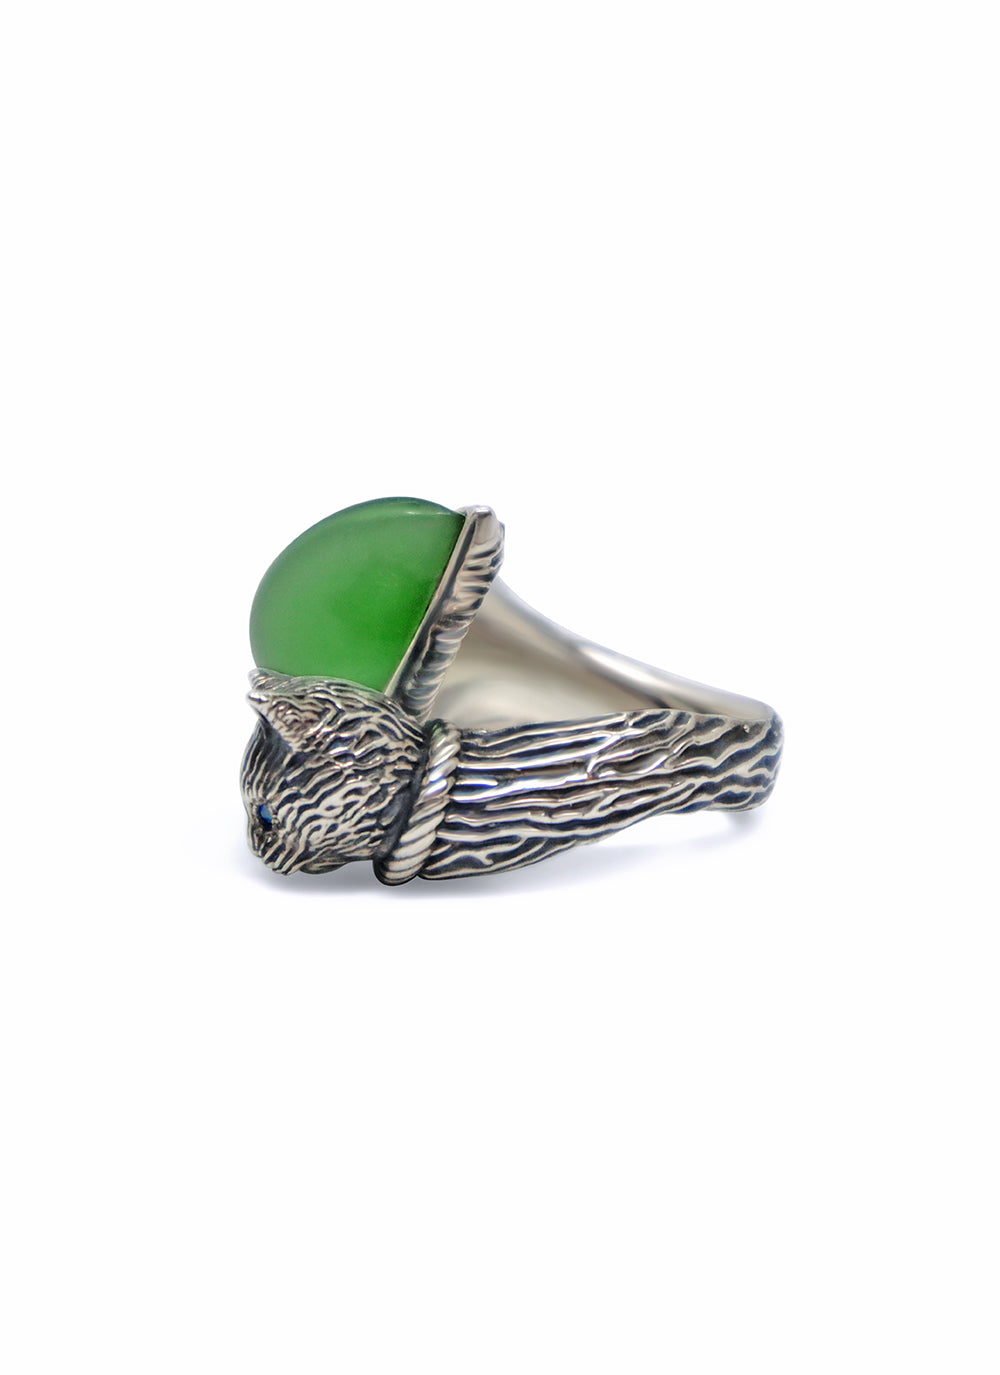 Silver Ring by Shabeeg